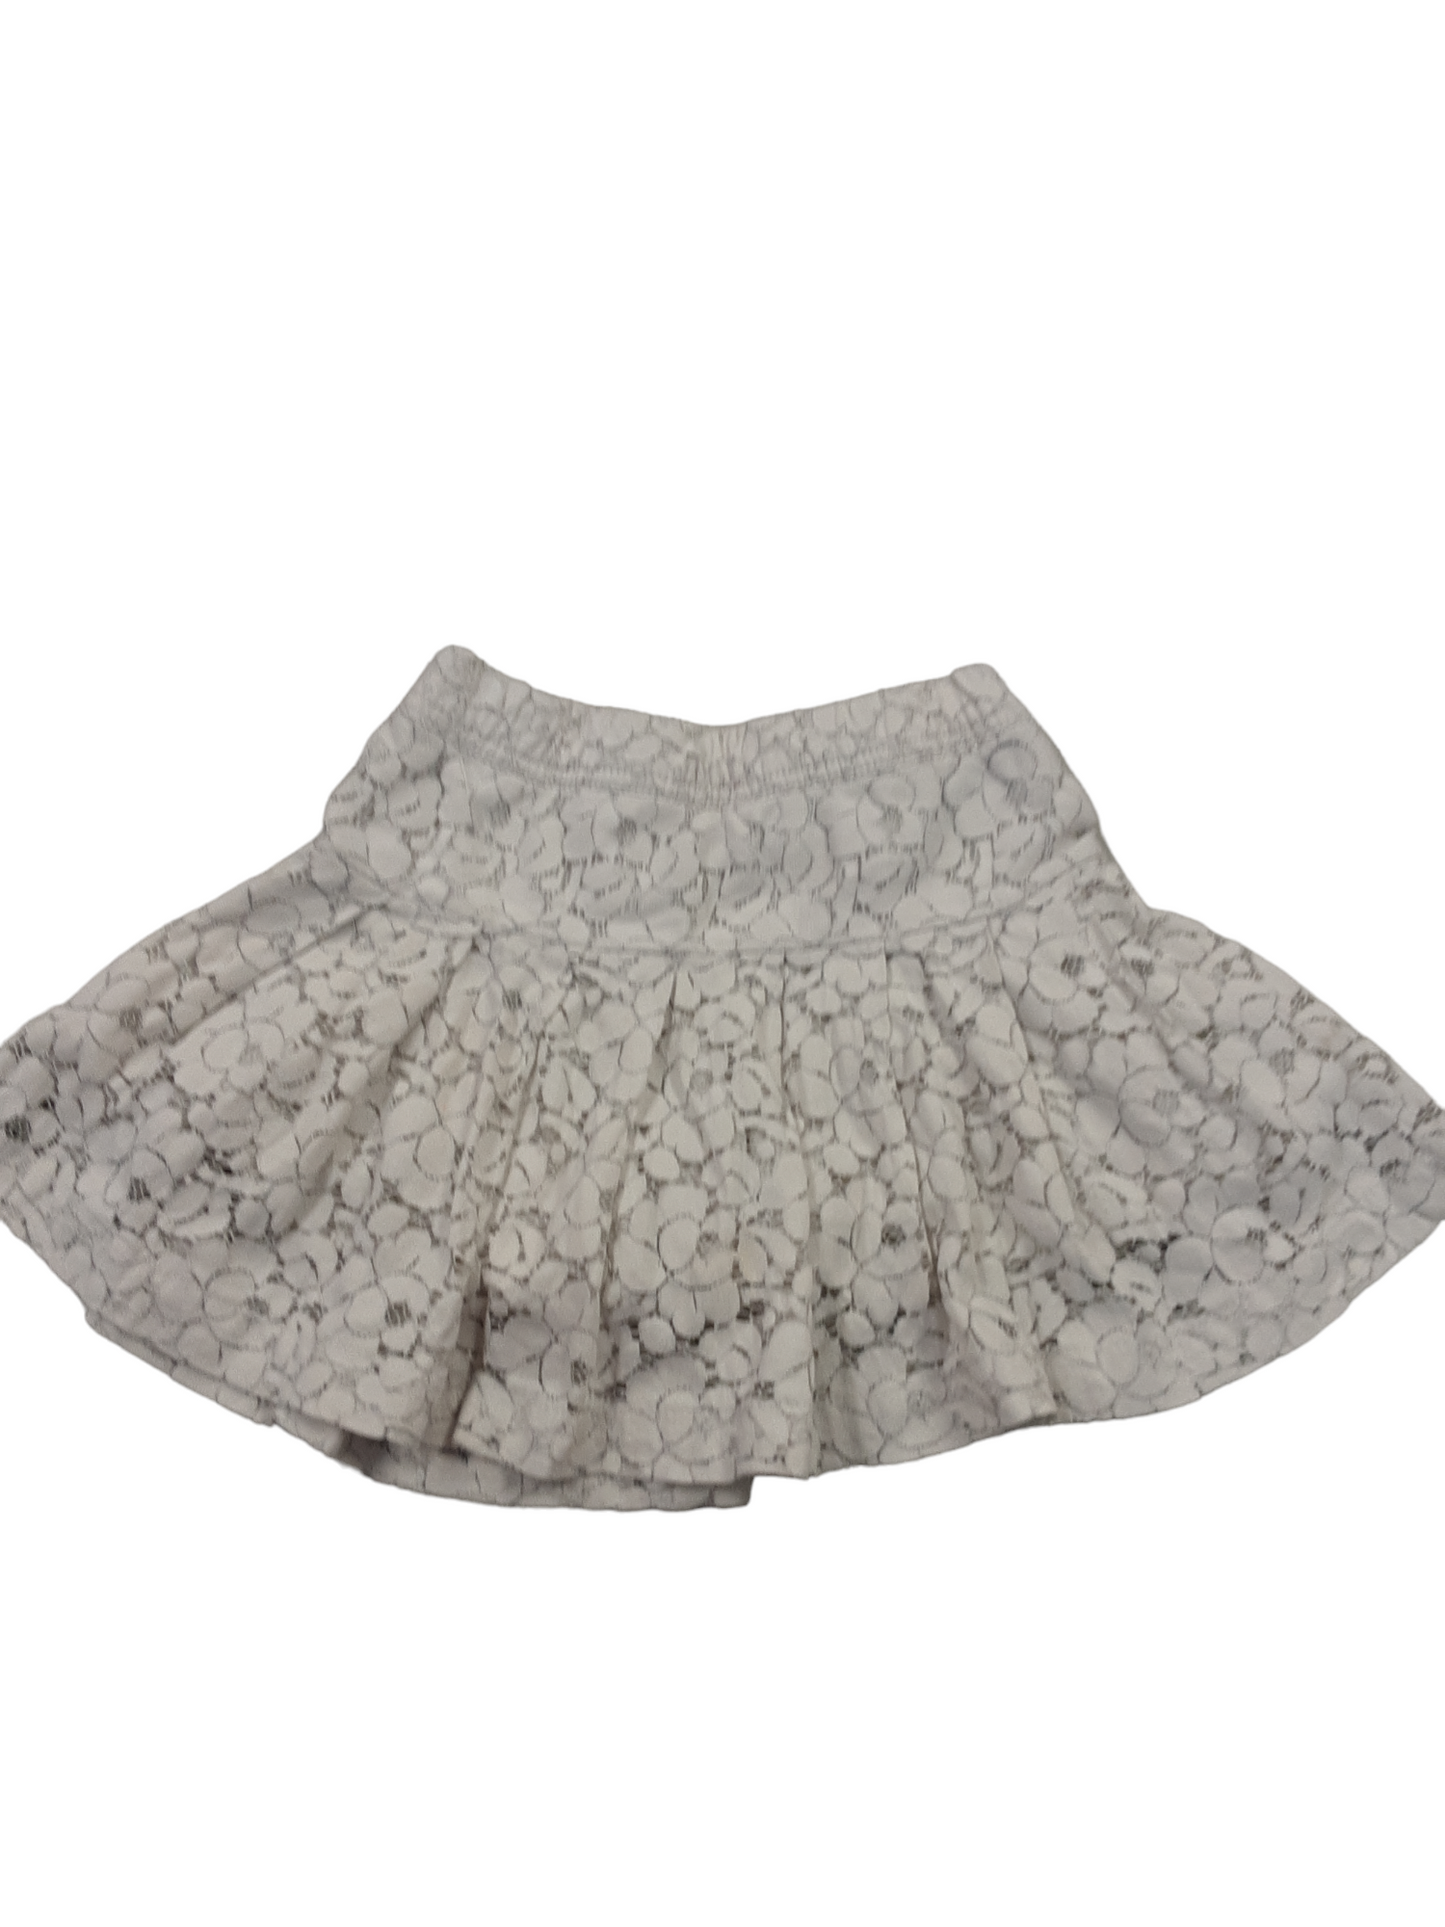 Antique white floral  lace skirt with built in shorts size 5